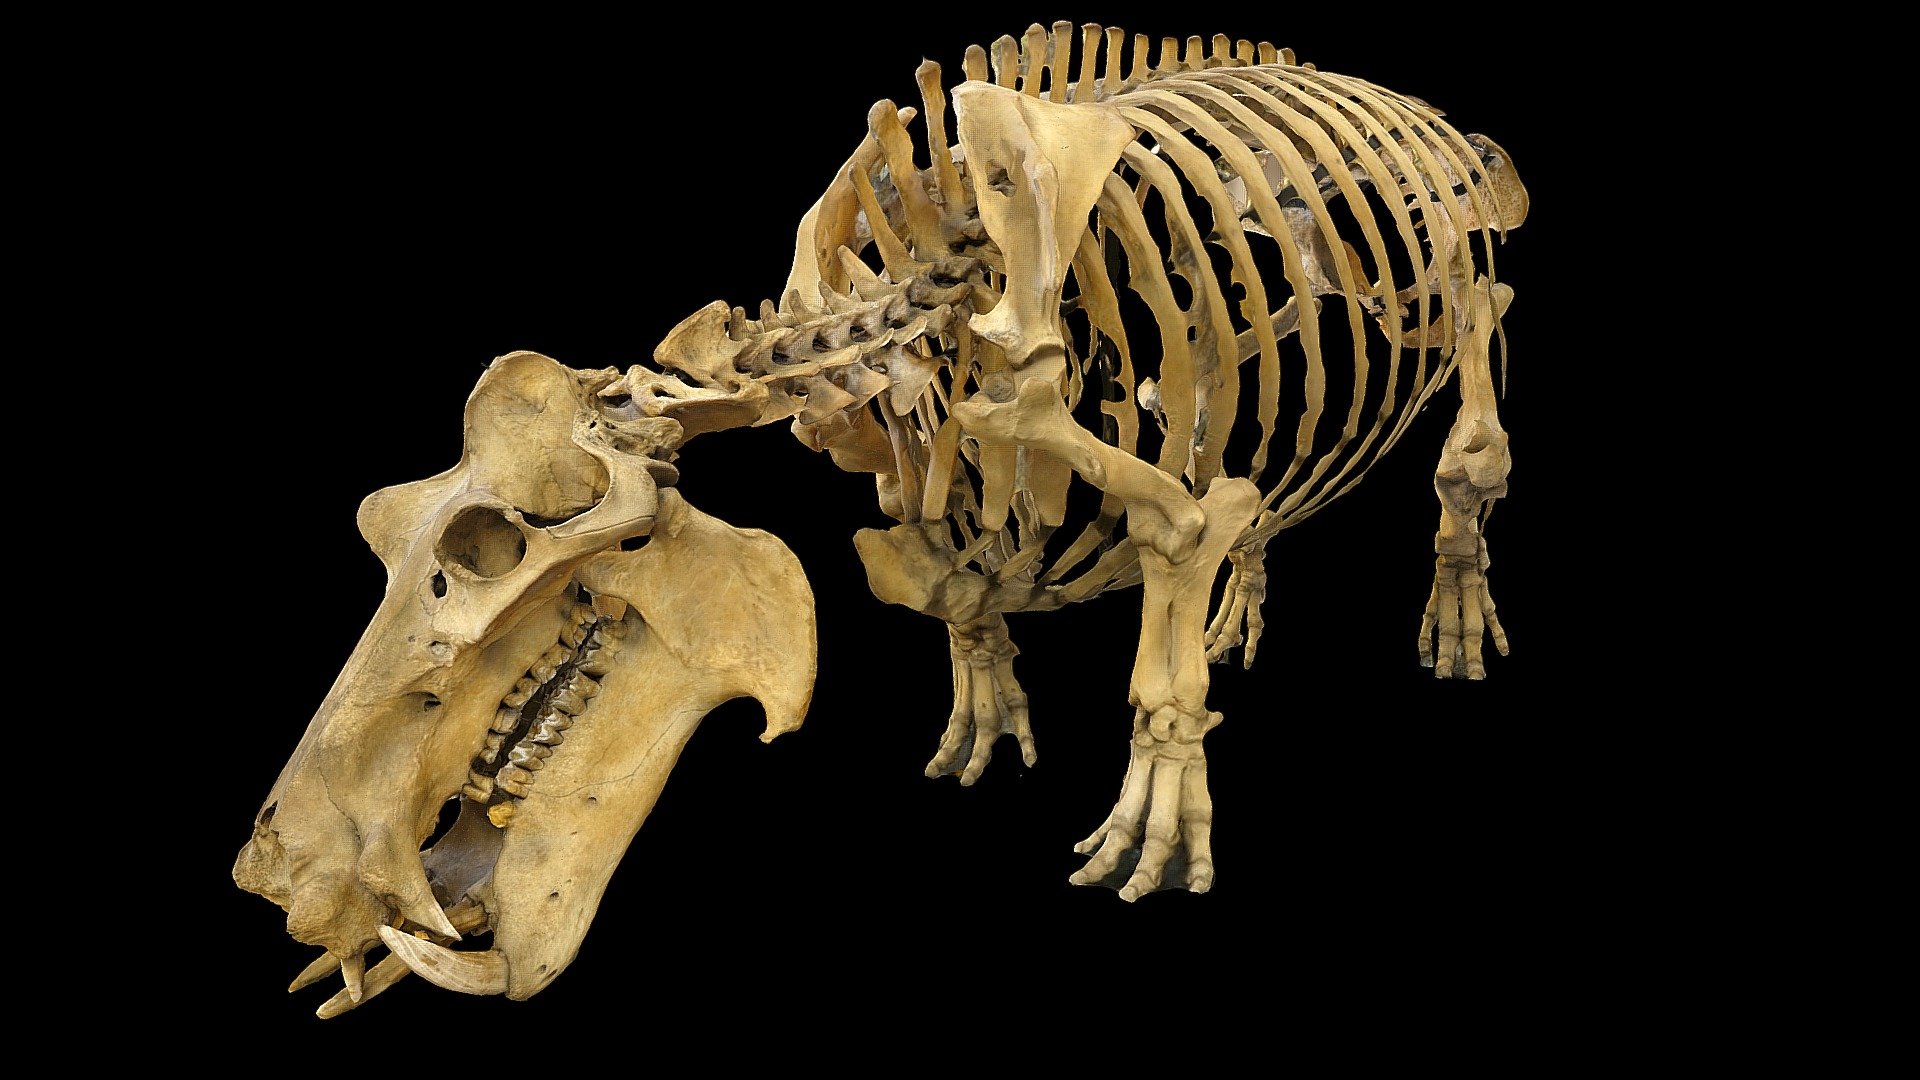 From the collection of the University of Liège (Belgium).
Photogrammetry using Reality Capture and Panasonic TZ80 - Hippopotamus Skeleton - Buy Royalty Free 3D model by LZ Creation (@jmch) 3d model